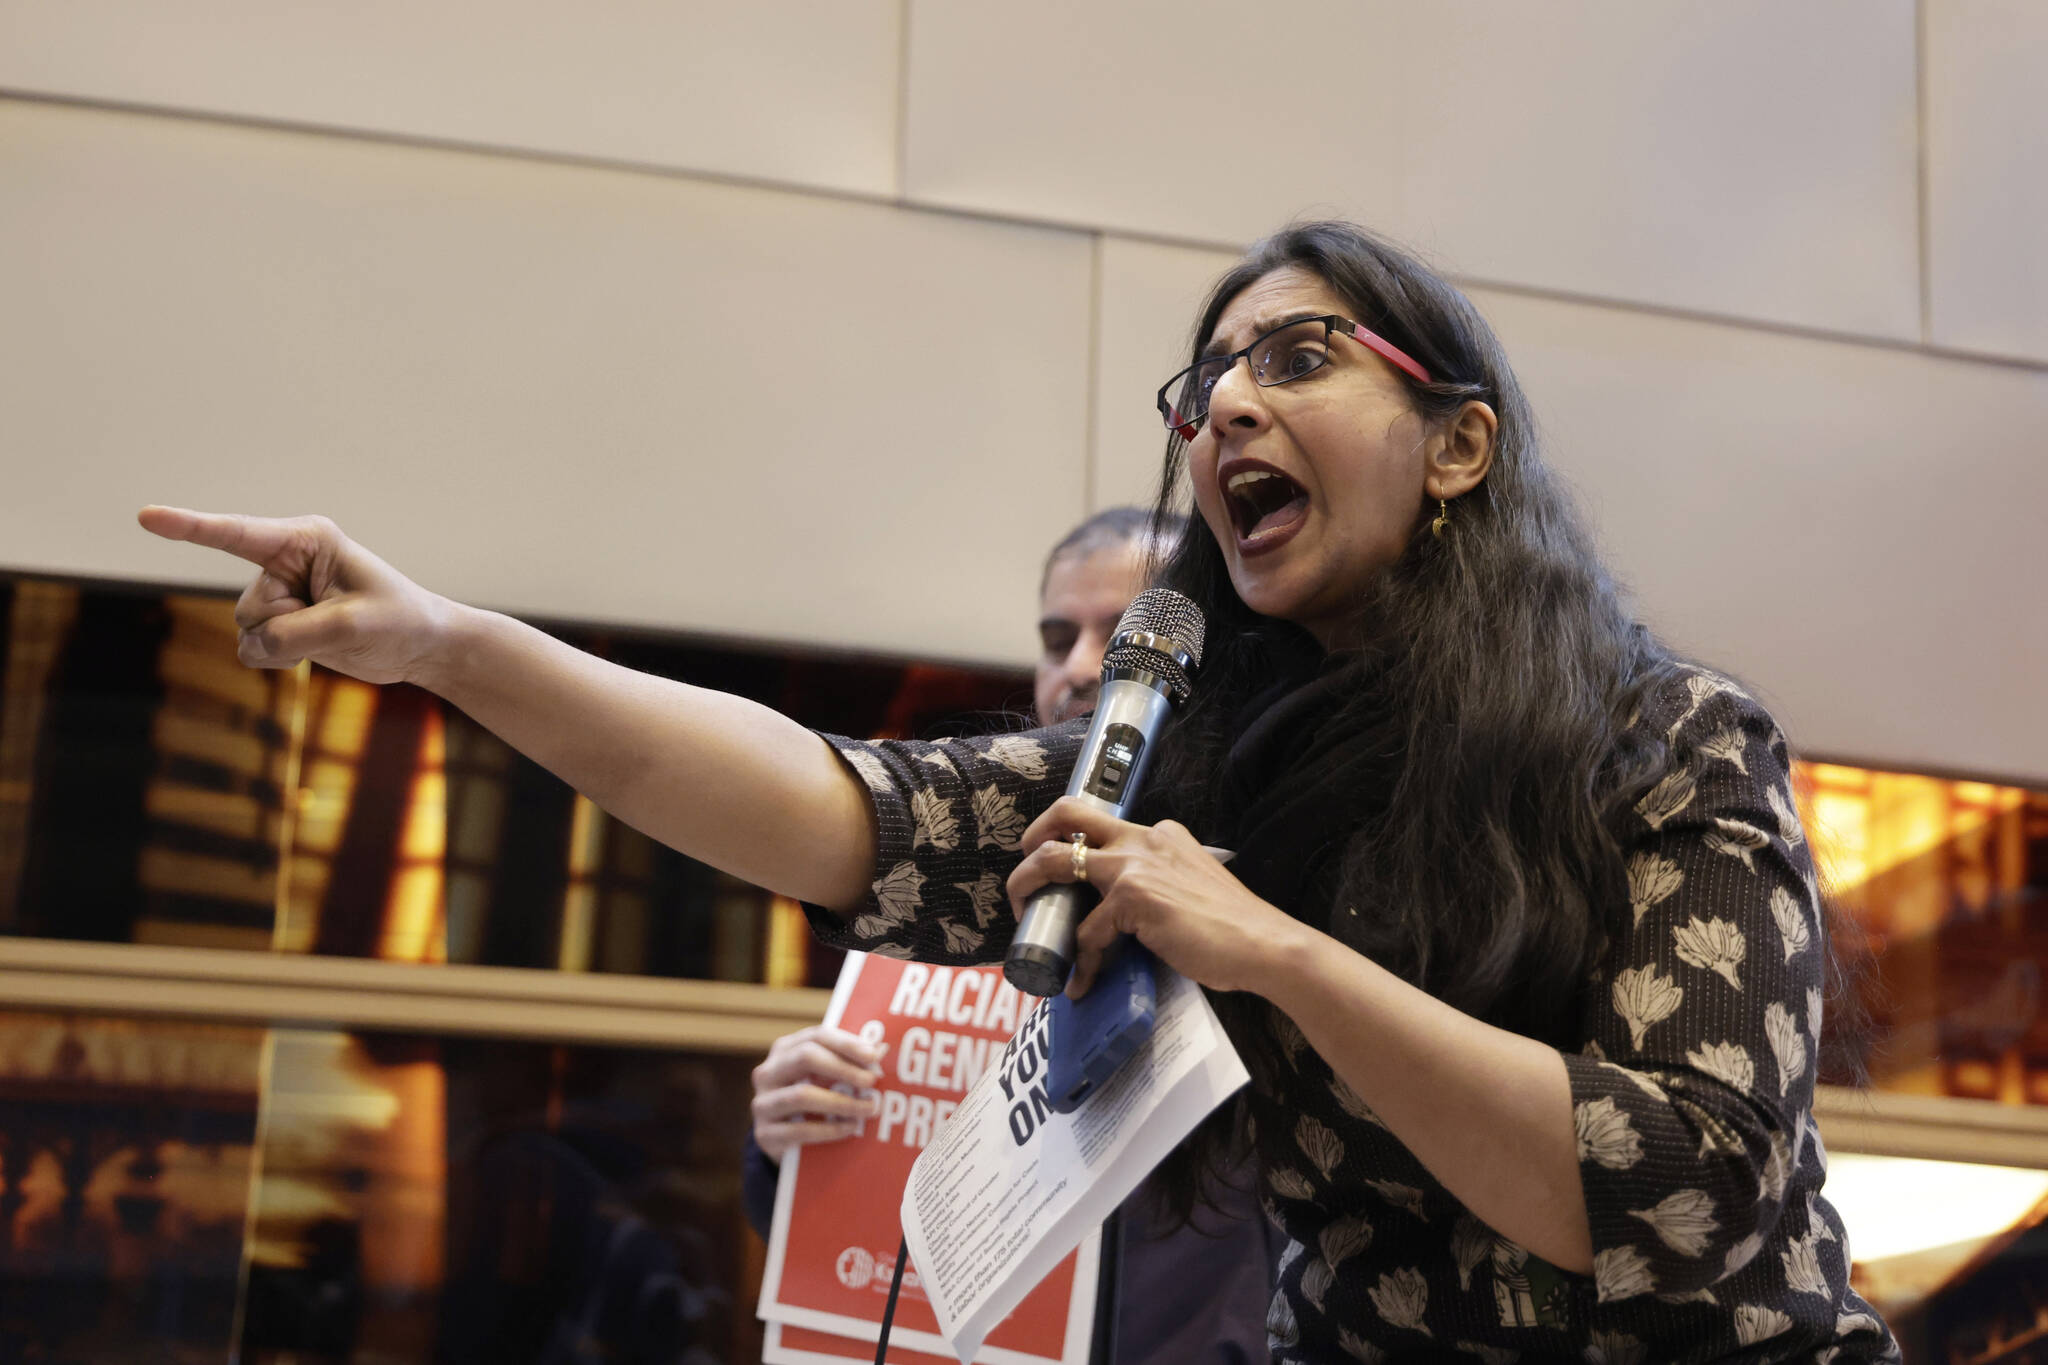 Seattle Council Member Kshama Sawant speaks to supporters and opponents of a proposed ordinance to add caste to Seattle’s anti-discrimination laws at a rally at Seattle City Hall, Tuesday, Feb. 21, 2023, in Seattle. Sawant proposed the ordinance. (AP Photo/John Froschauer)